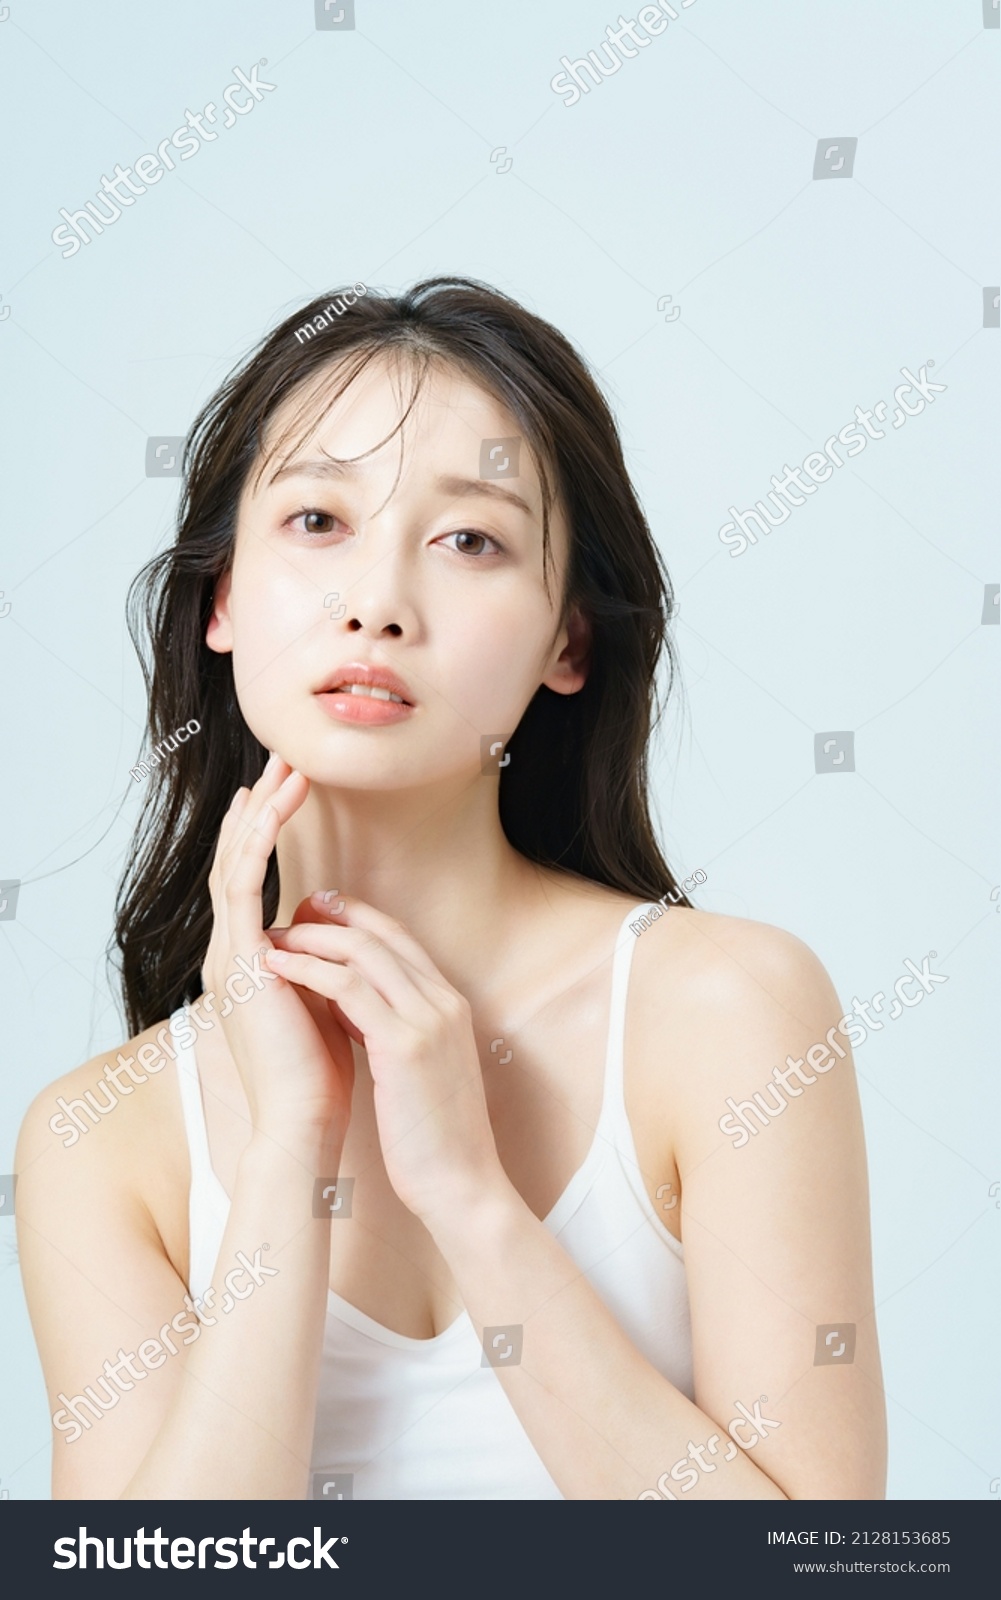 Beauty image of a young woman with good skin gloss #2128153685